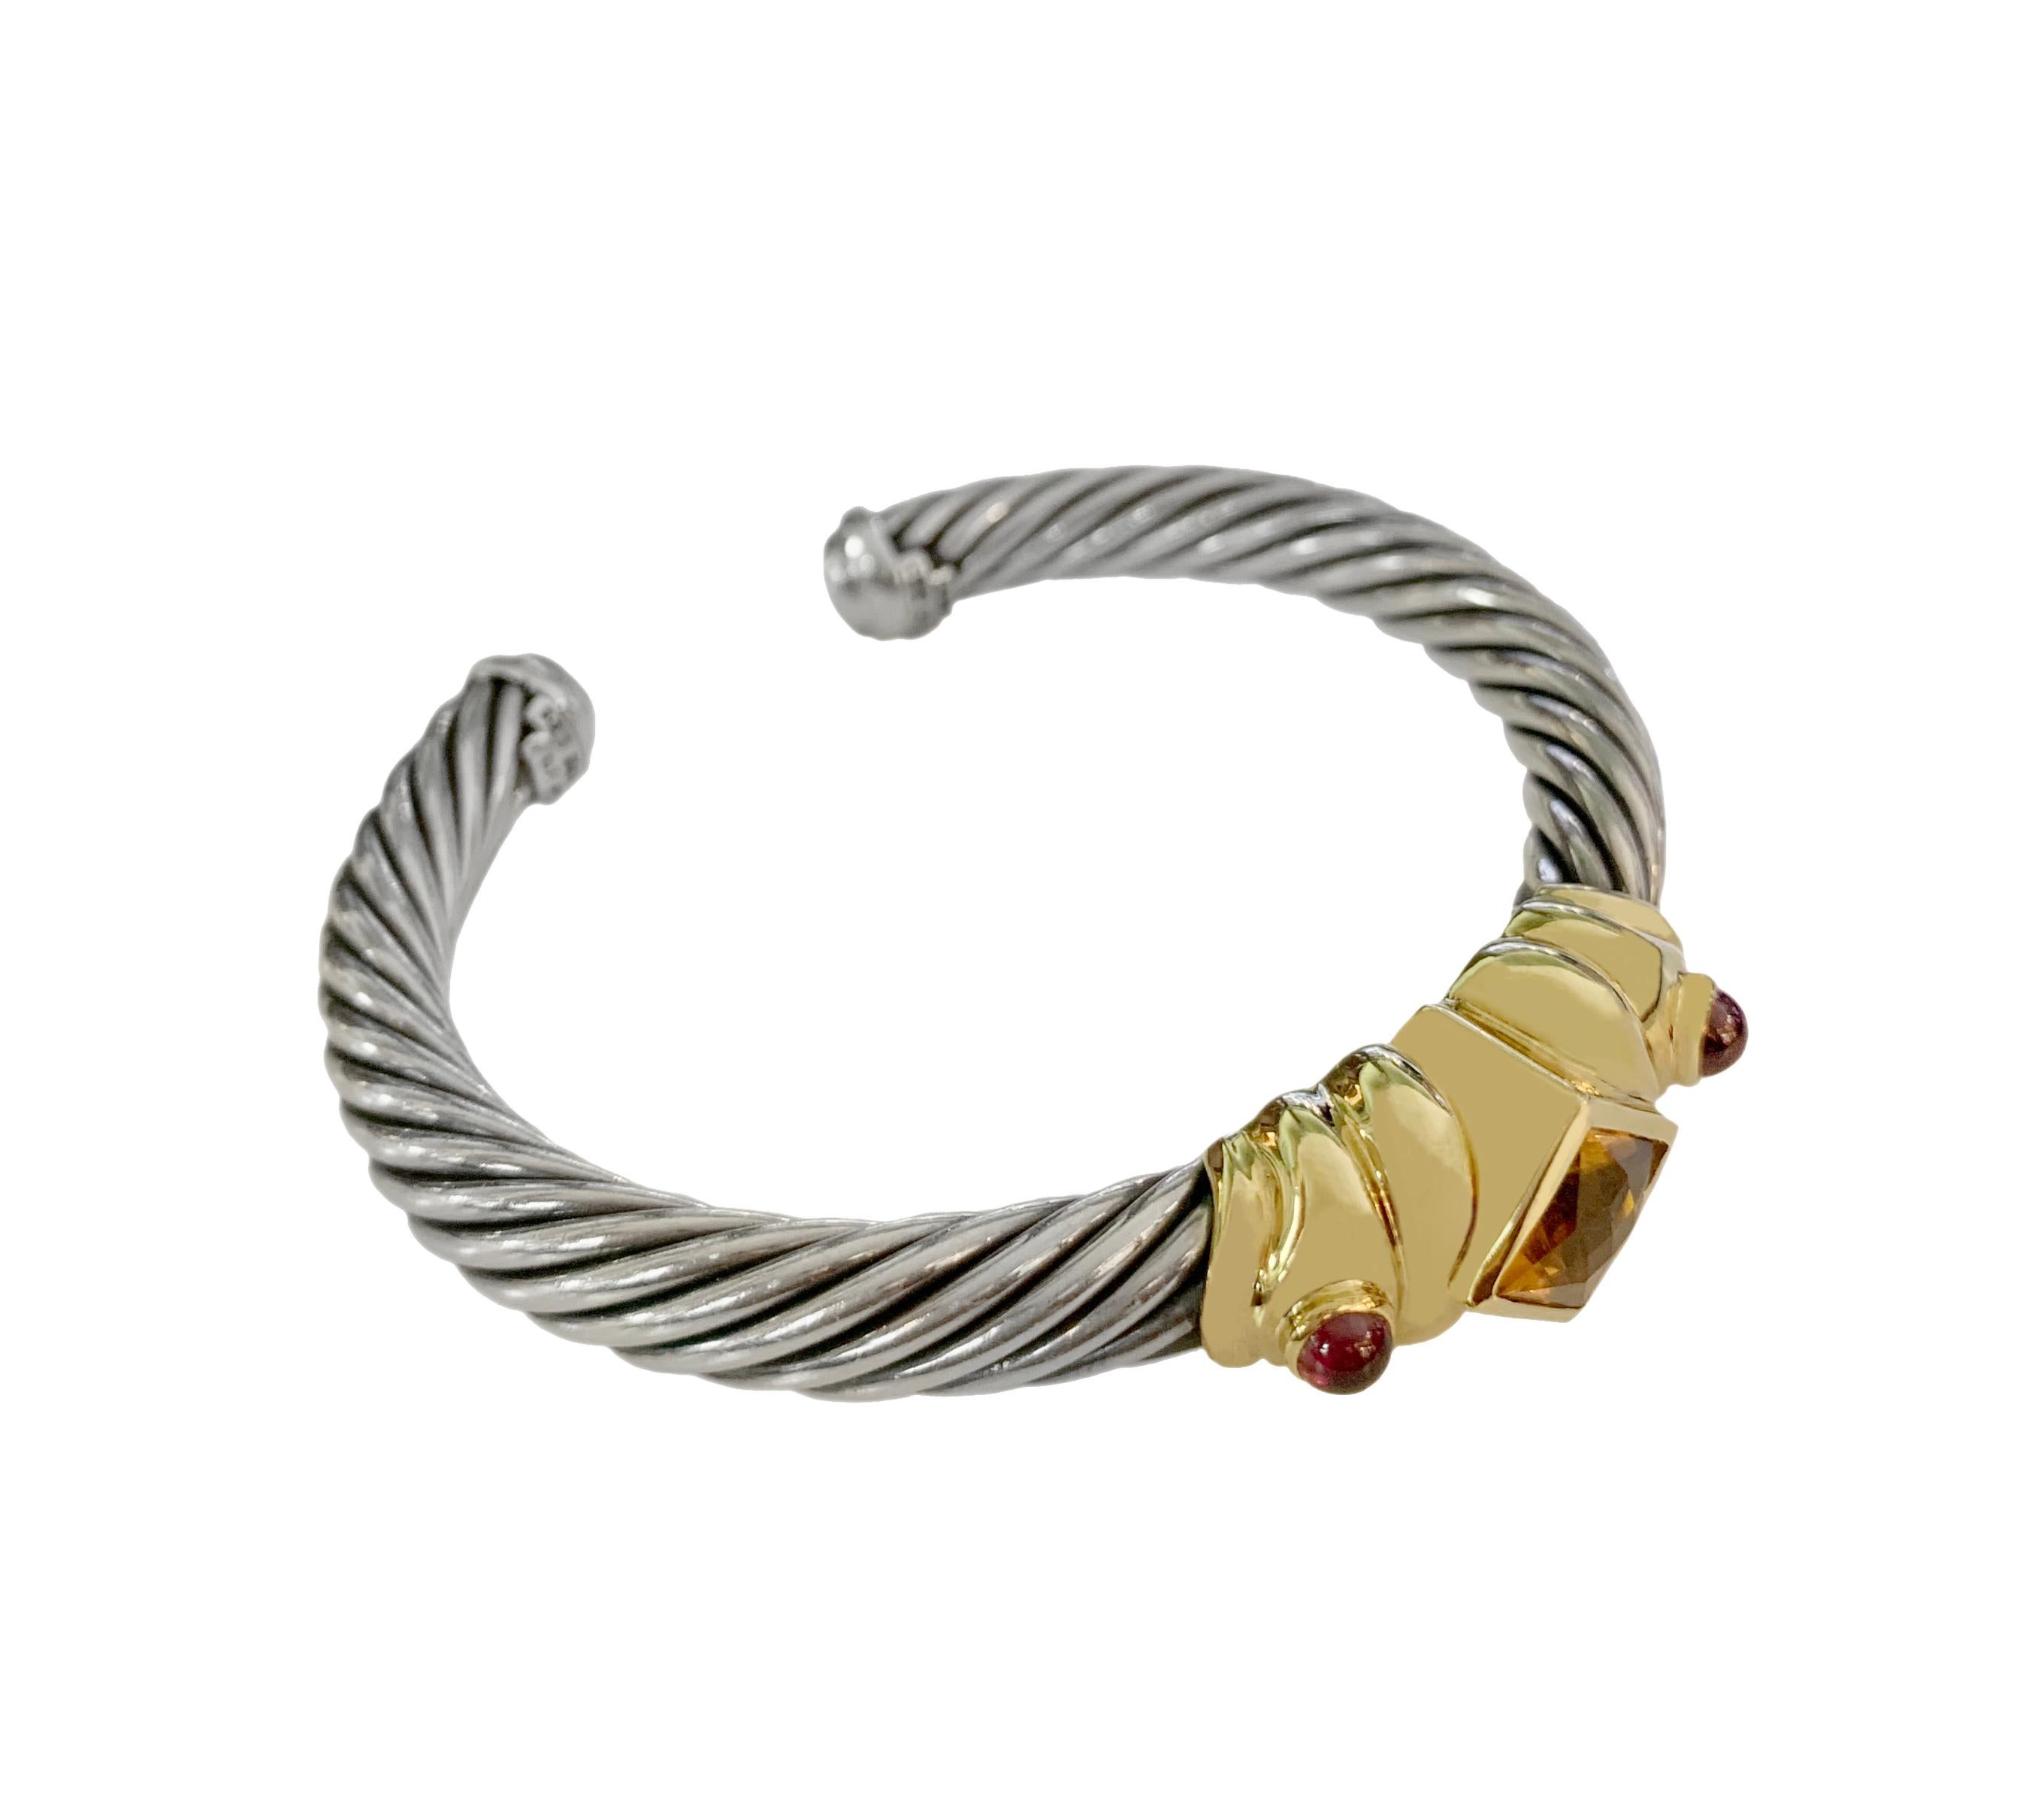 Mint condition
Sterling Silver & 14k Yellow Gold 
Citrine
Width: 7mm
Size: Medium
Comes with David Yurman pouch